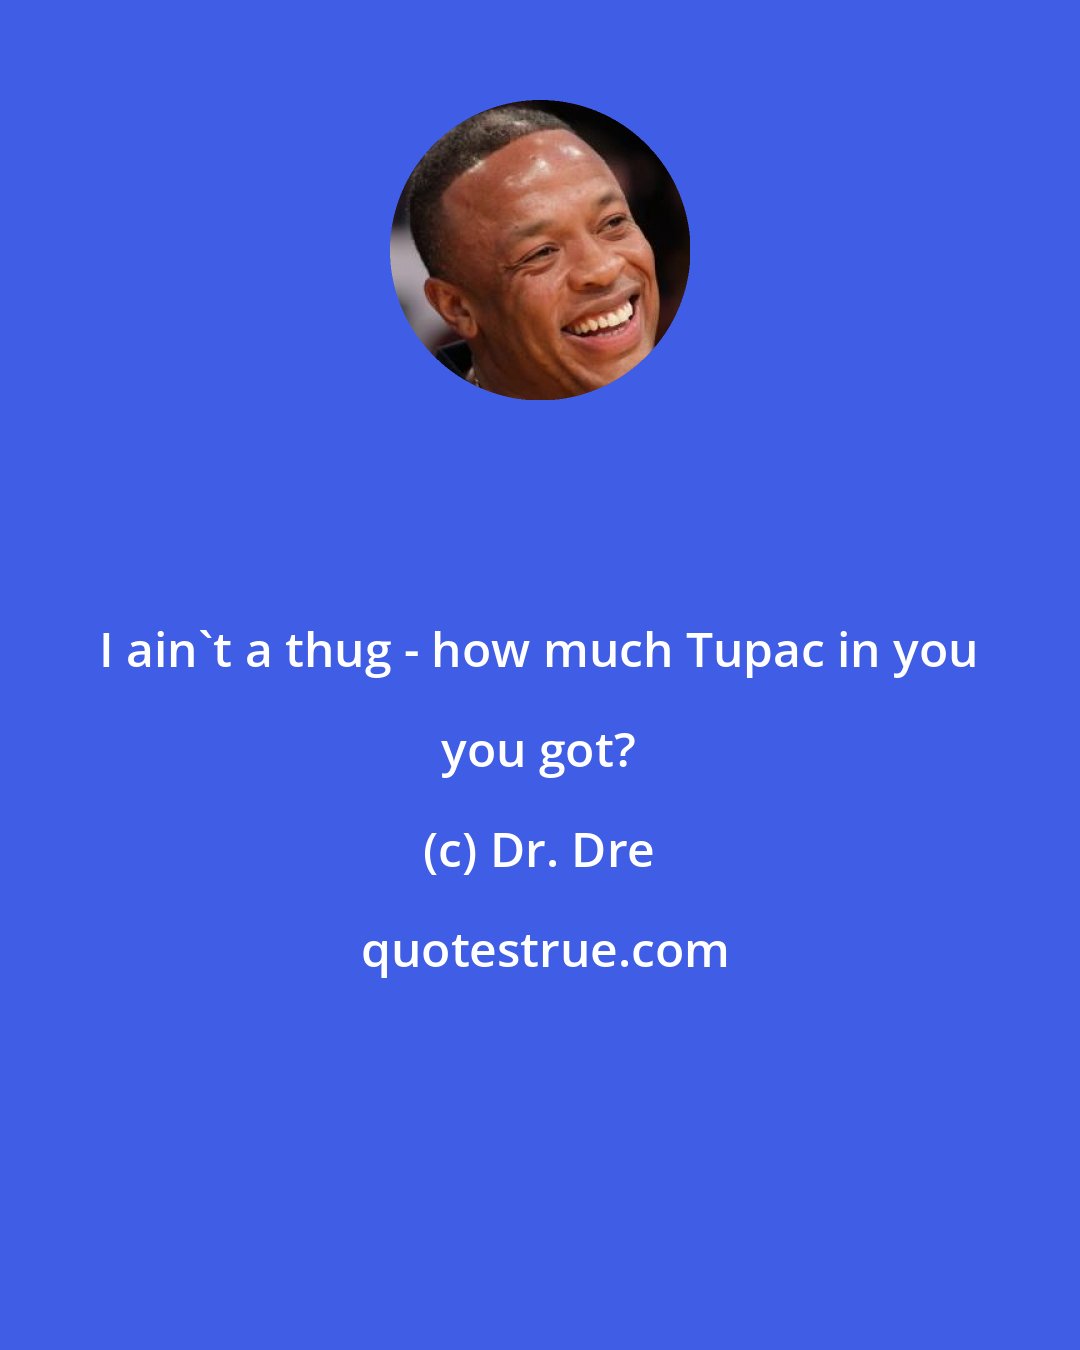 Dr. Dre: I ain't a thug - how much Tupac in you you got?